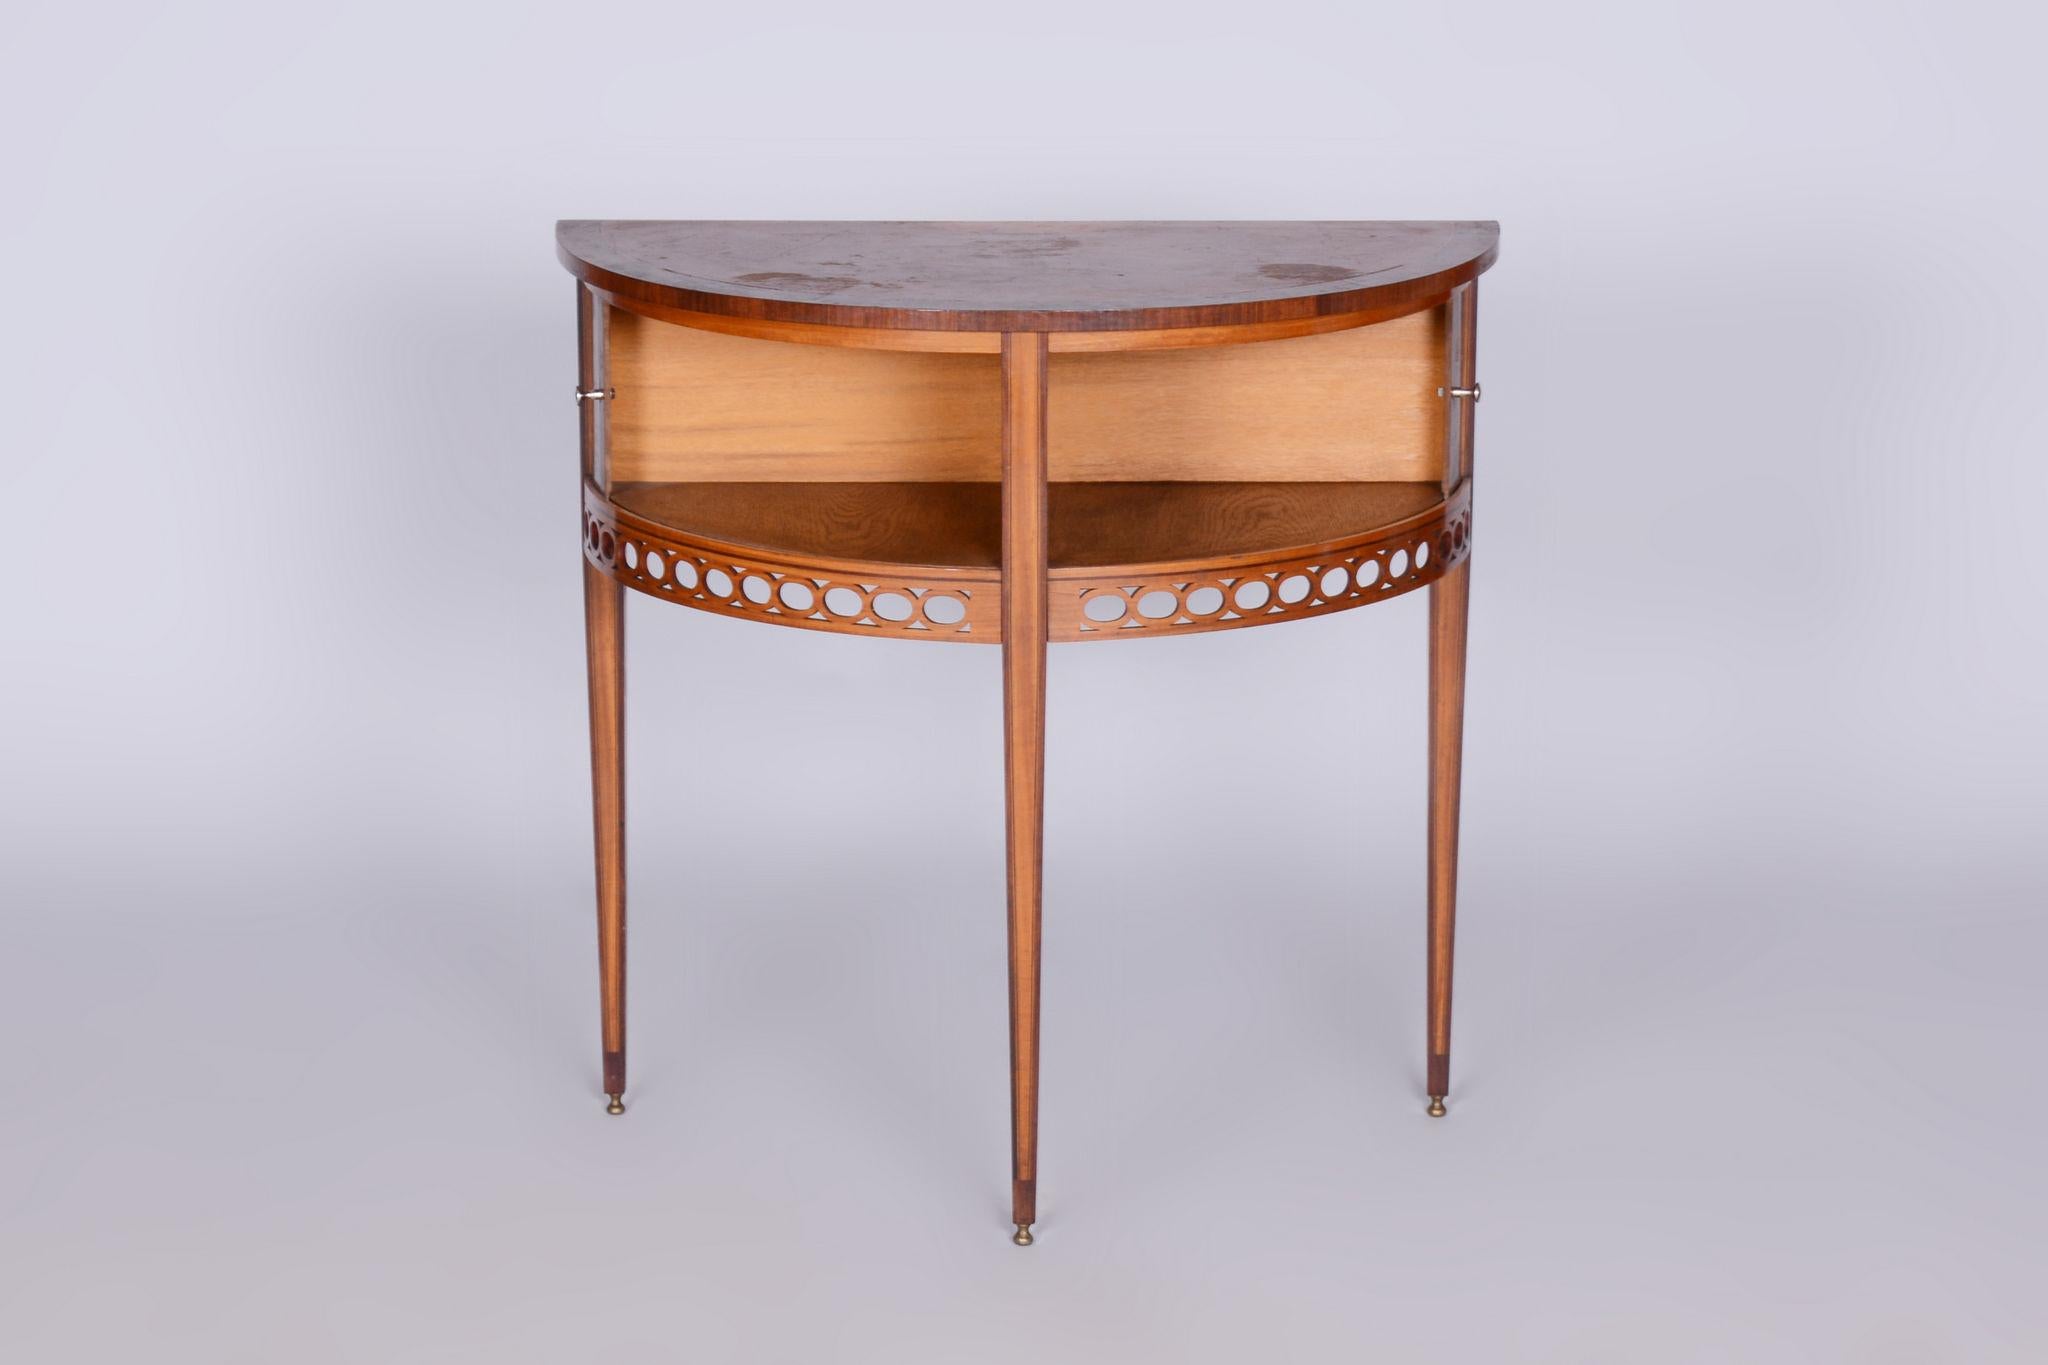 Restored Biedermeier Side Table, Walnut, Maple, Unique Marquetry, France, 1850s For Sale 5